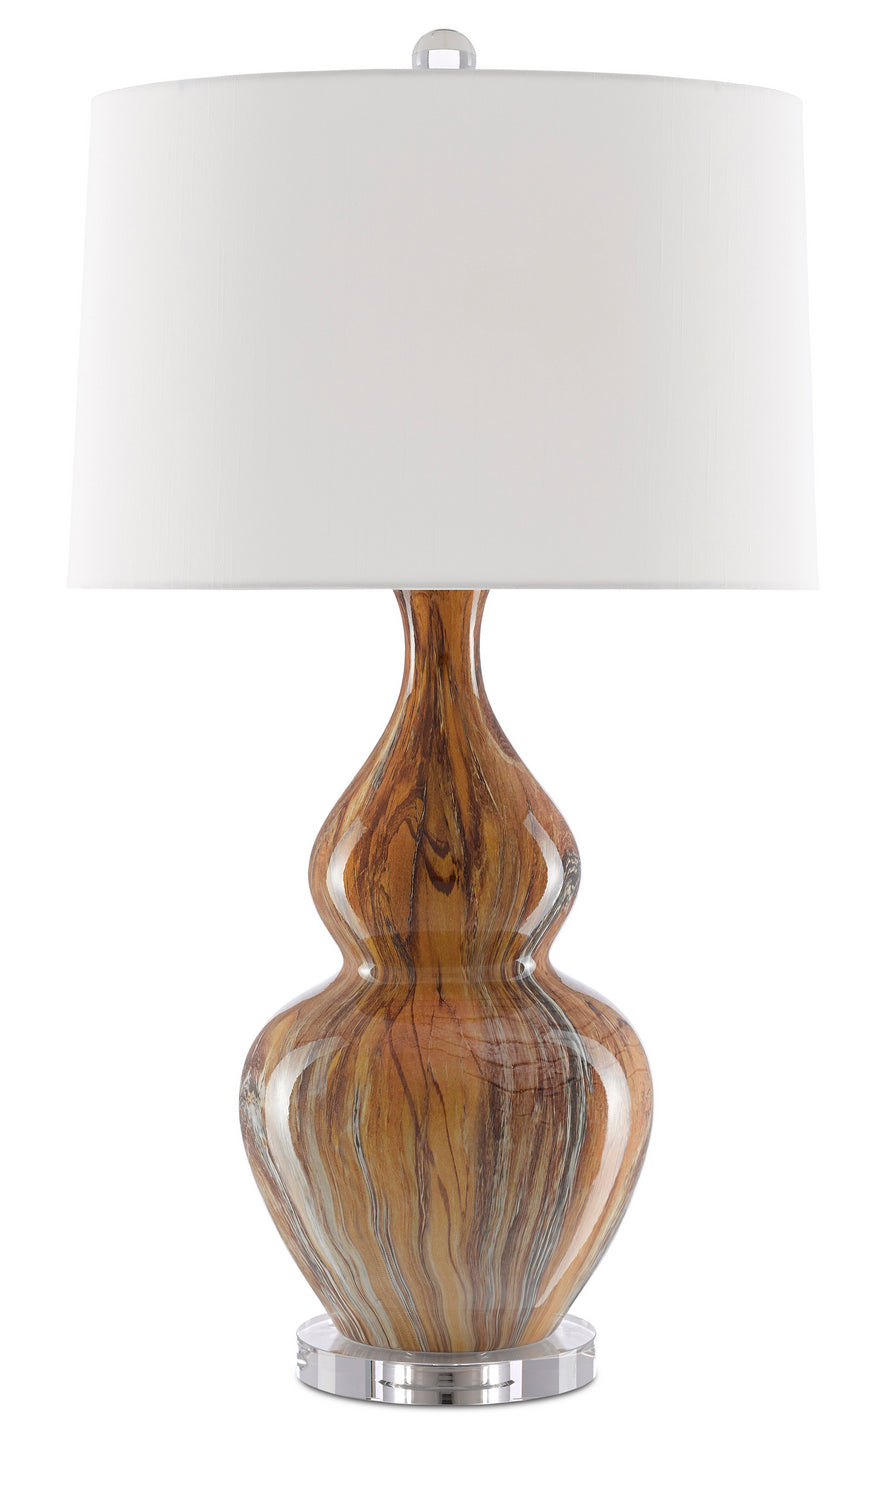 One Light Table Lamp from the Kolor collection in Earth/Brown finish